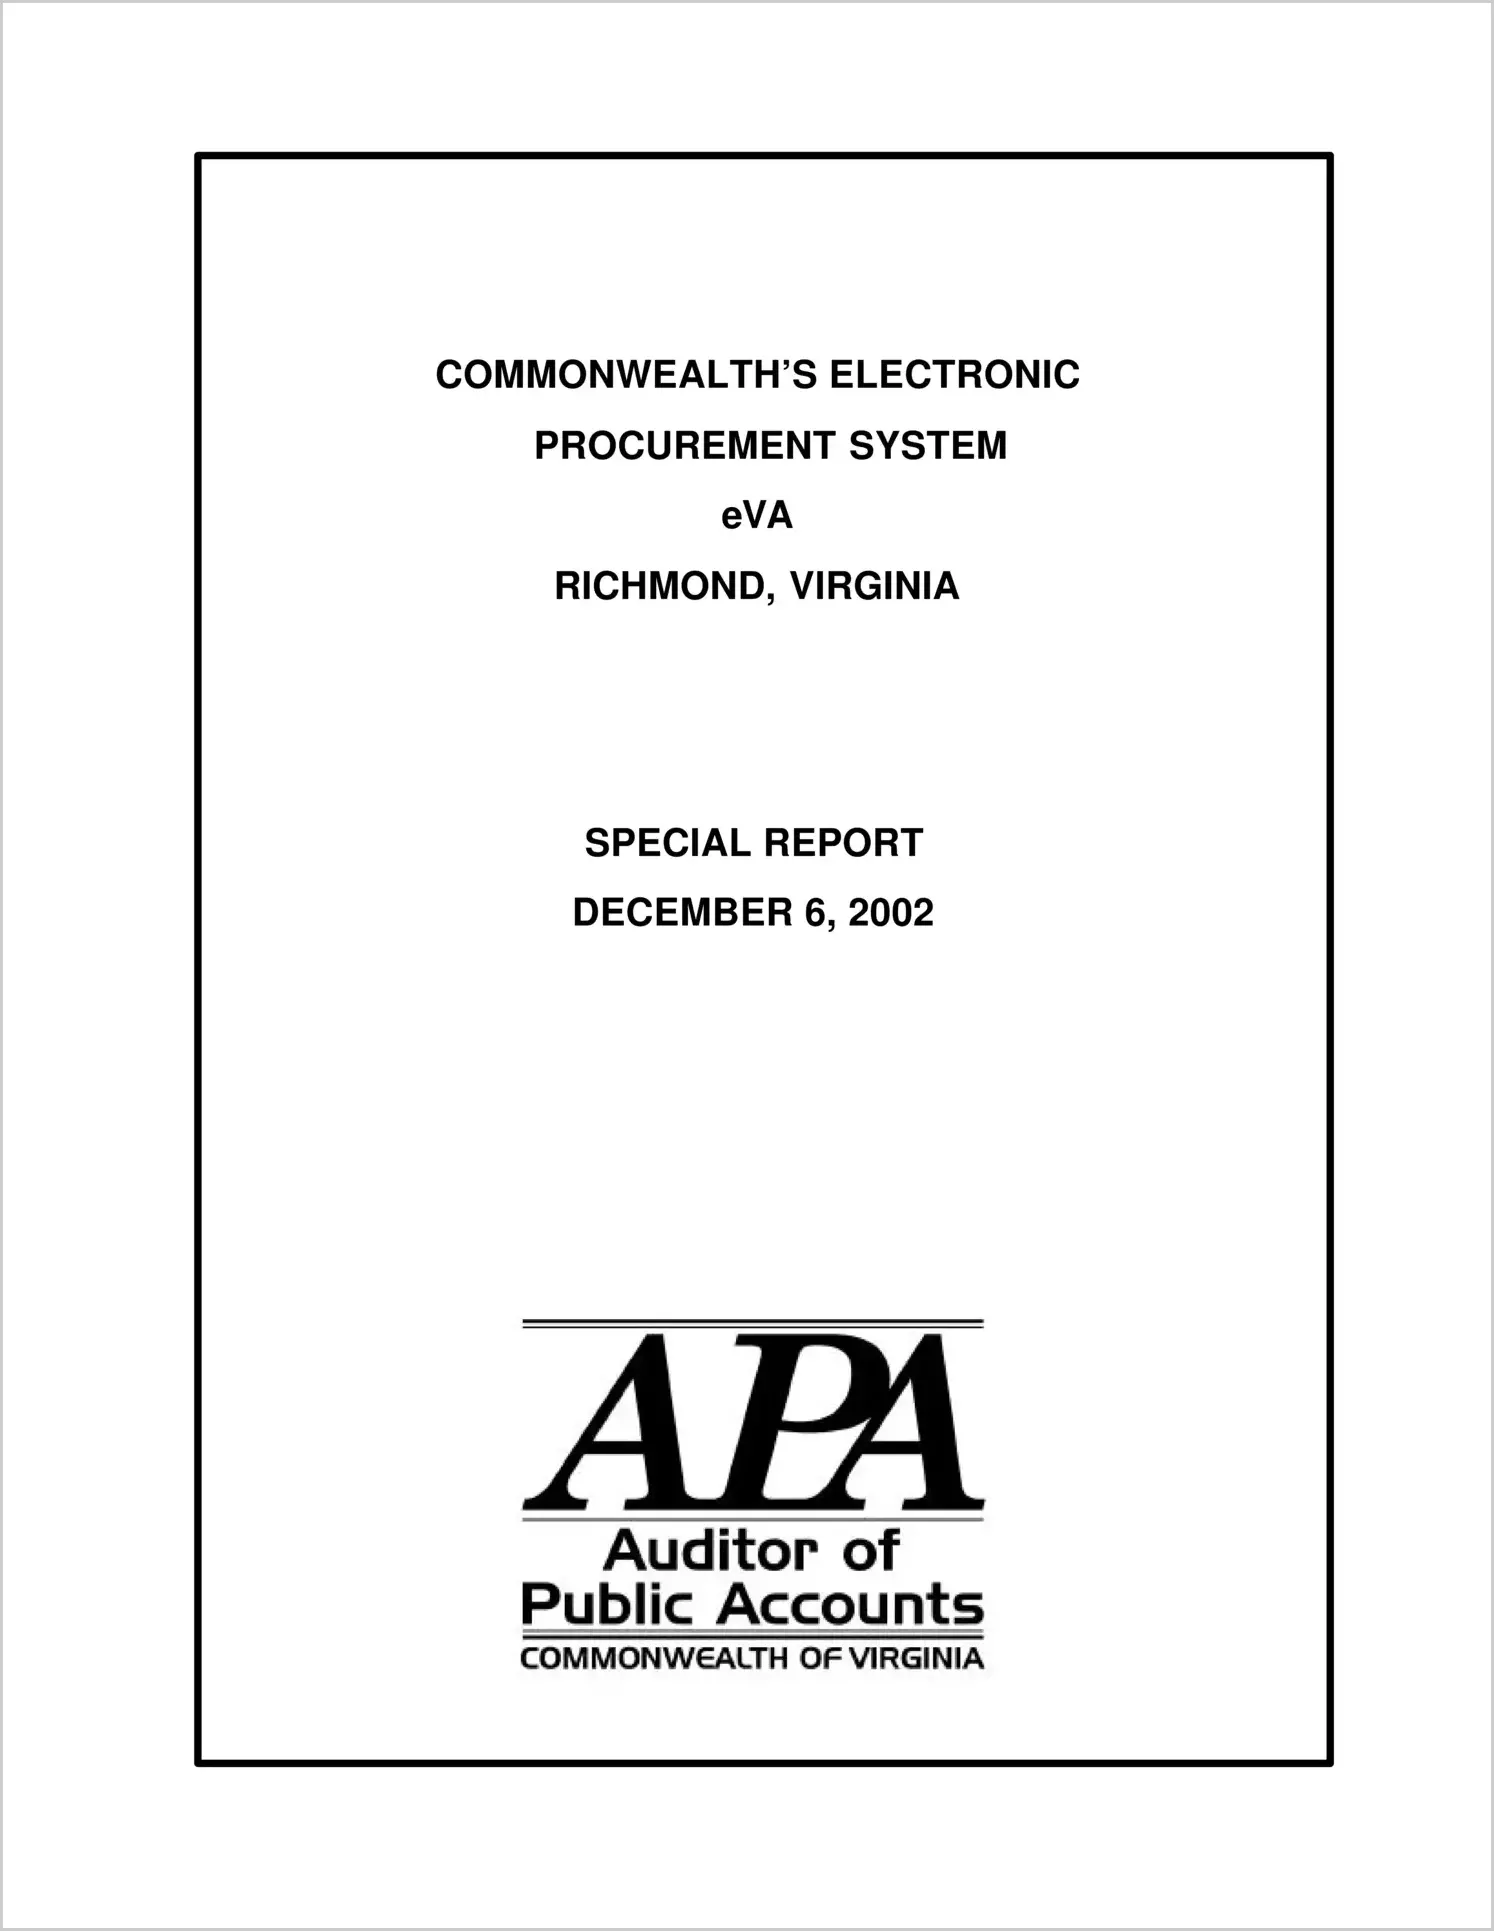 Special ReportCommonwealth`s Electronic Procurement System, eVA(Report Date: 12/6/2002)